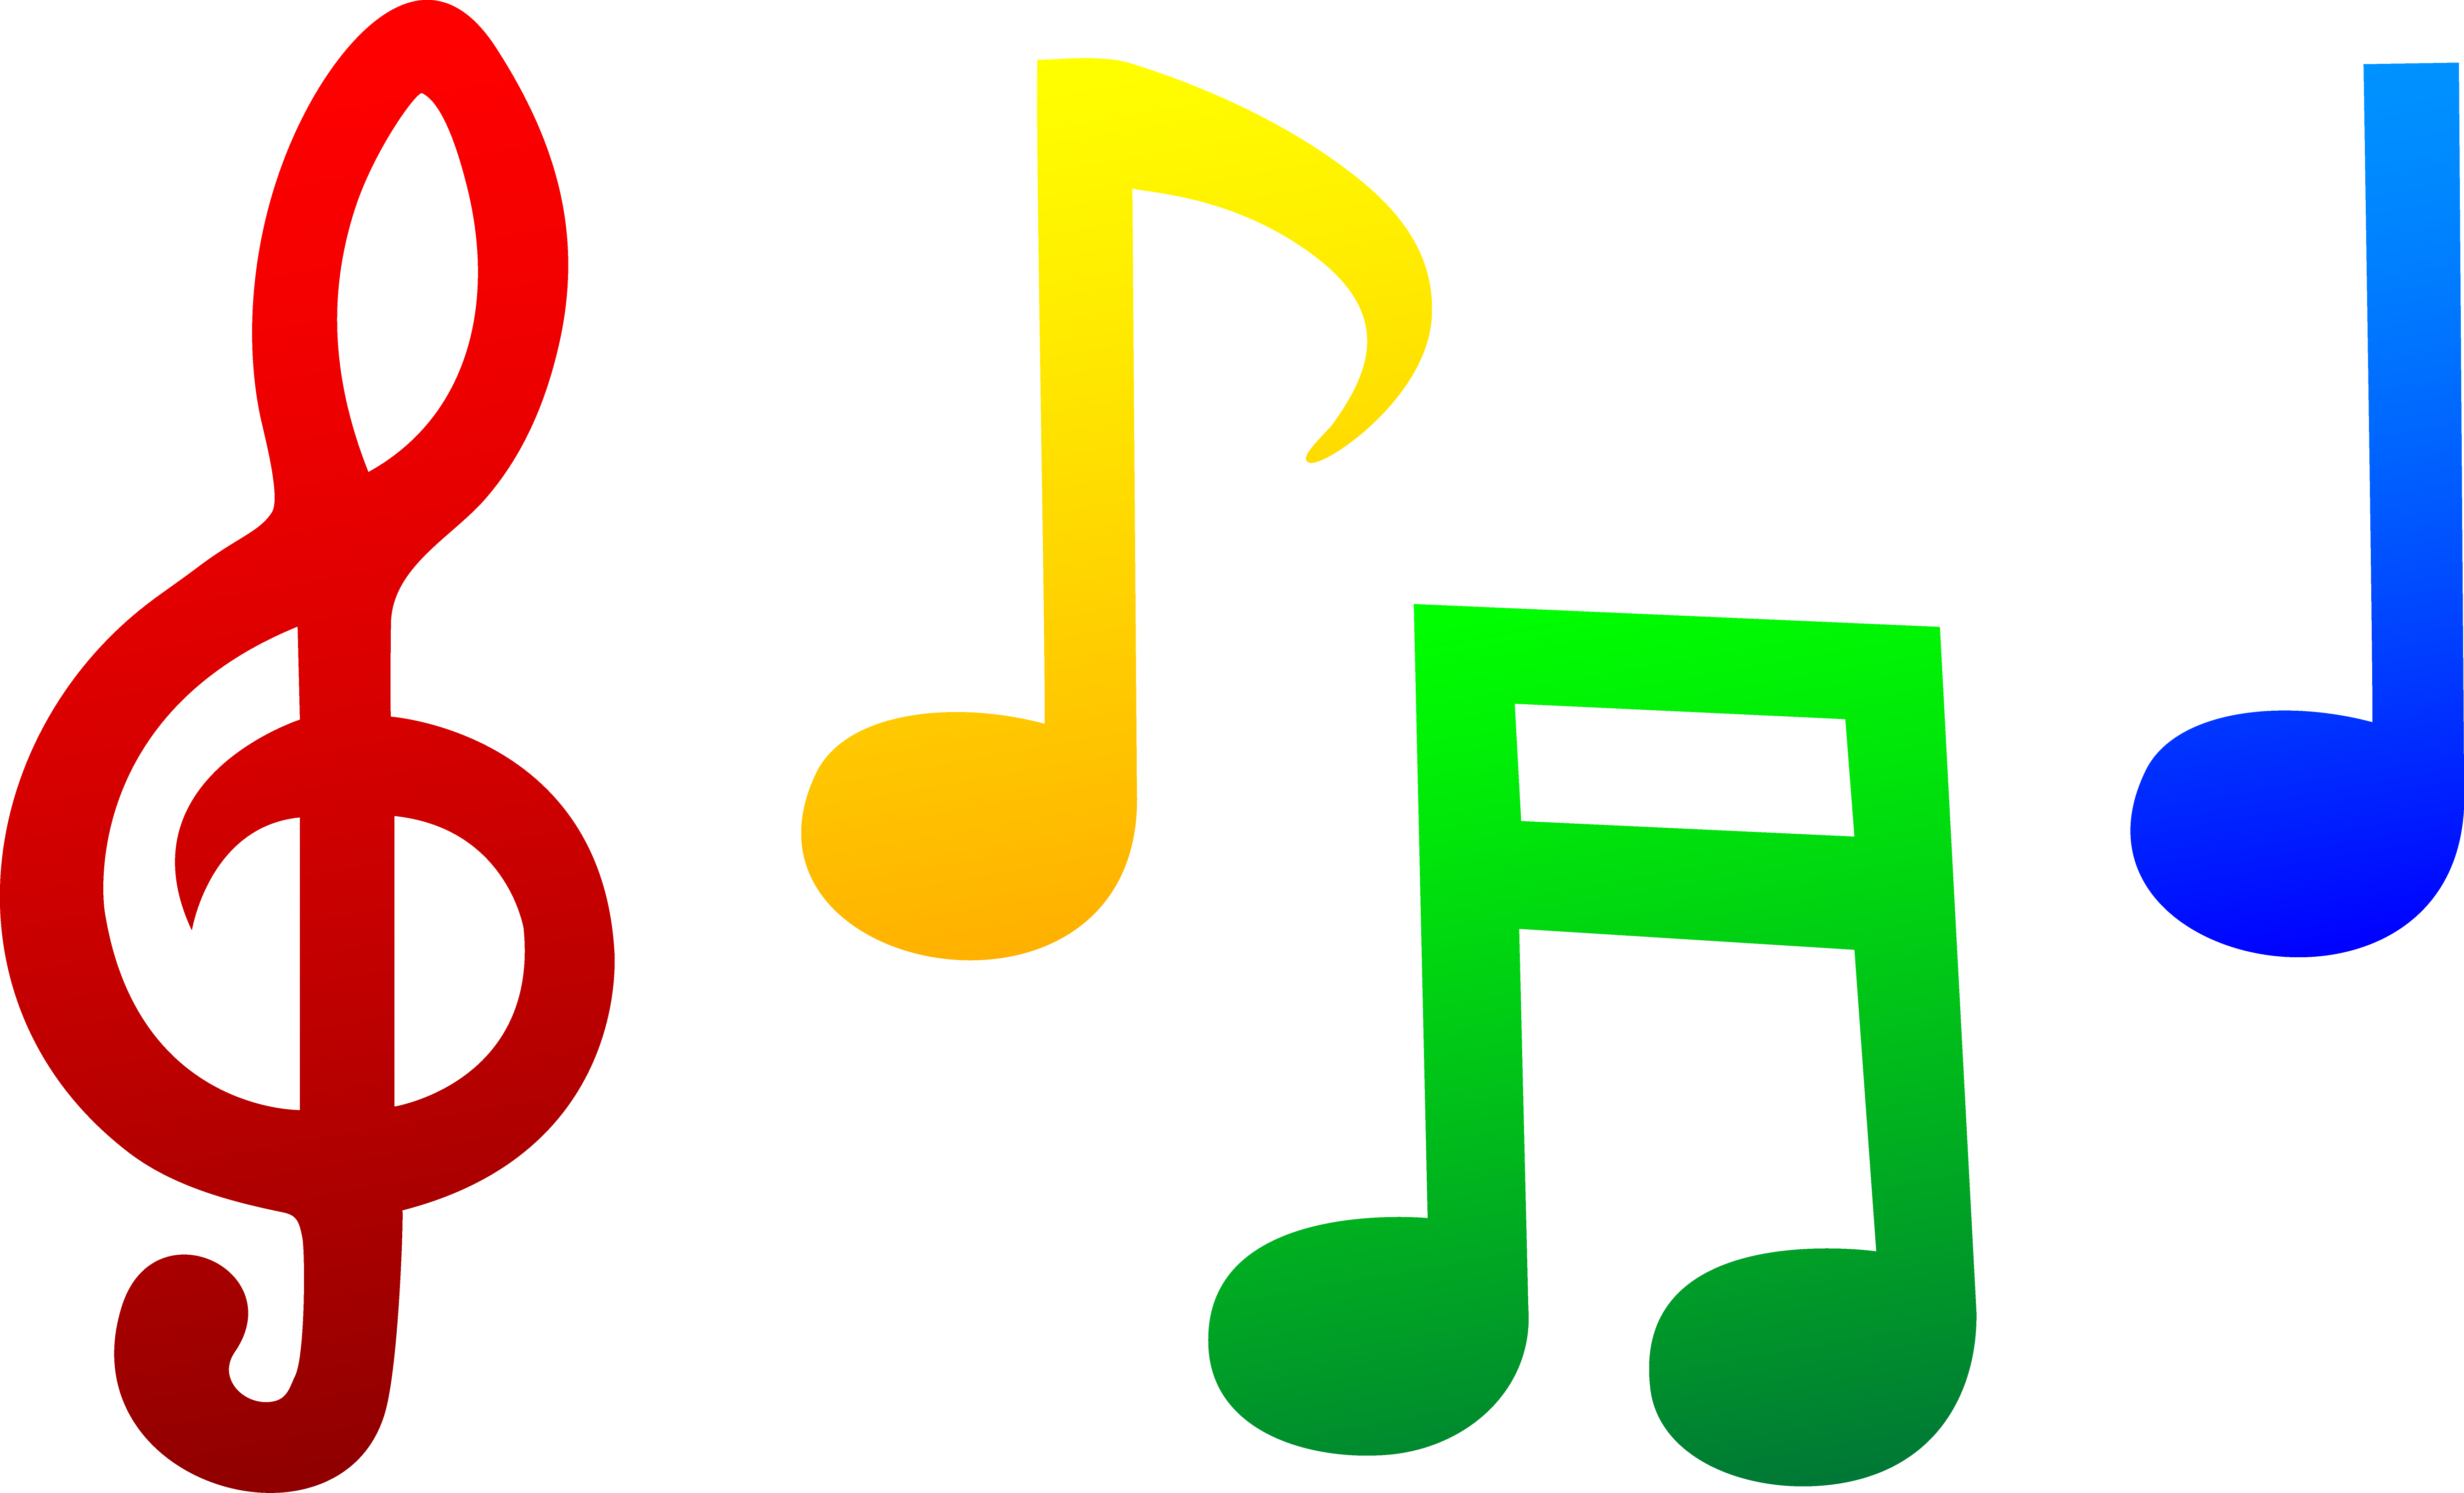 Colorful Music Notes In A Line   Clipart Panda   Free Clipart Images